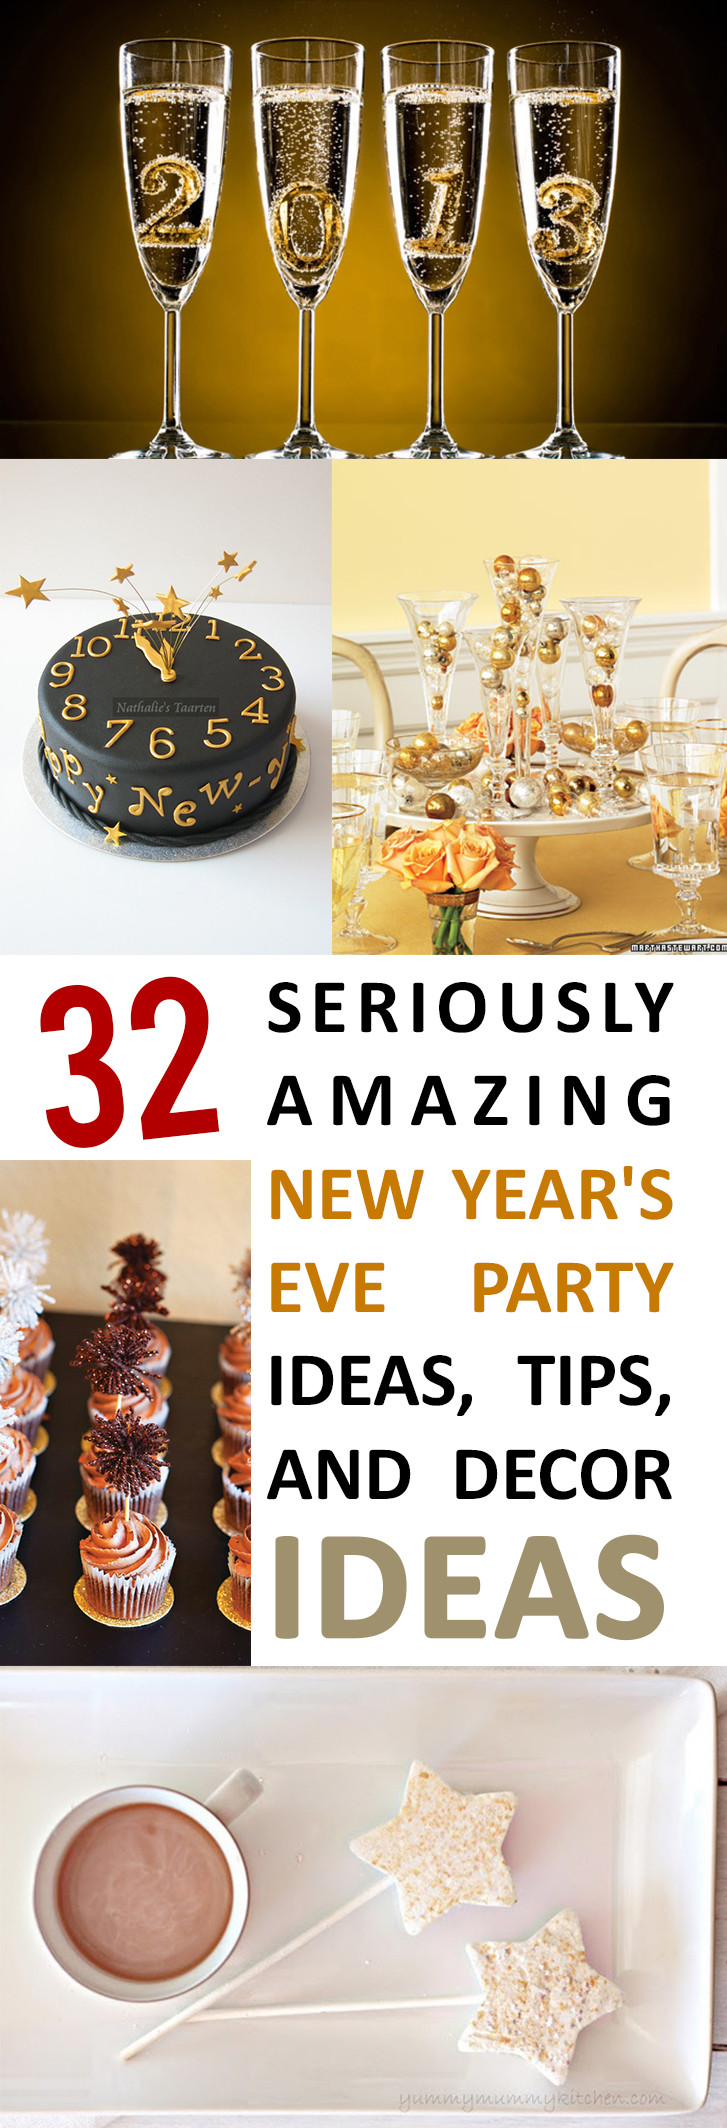 New Year Party Ideas At Home
 32 Seriously Amazing New Year s Eve Party Ideas Tips and